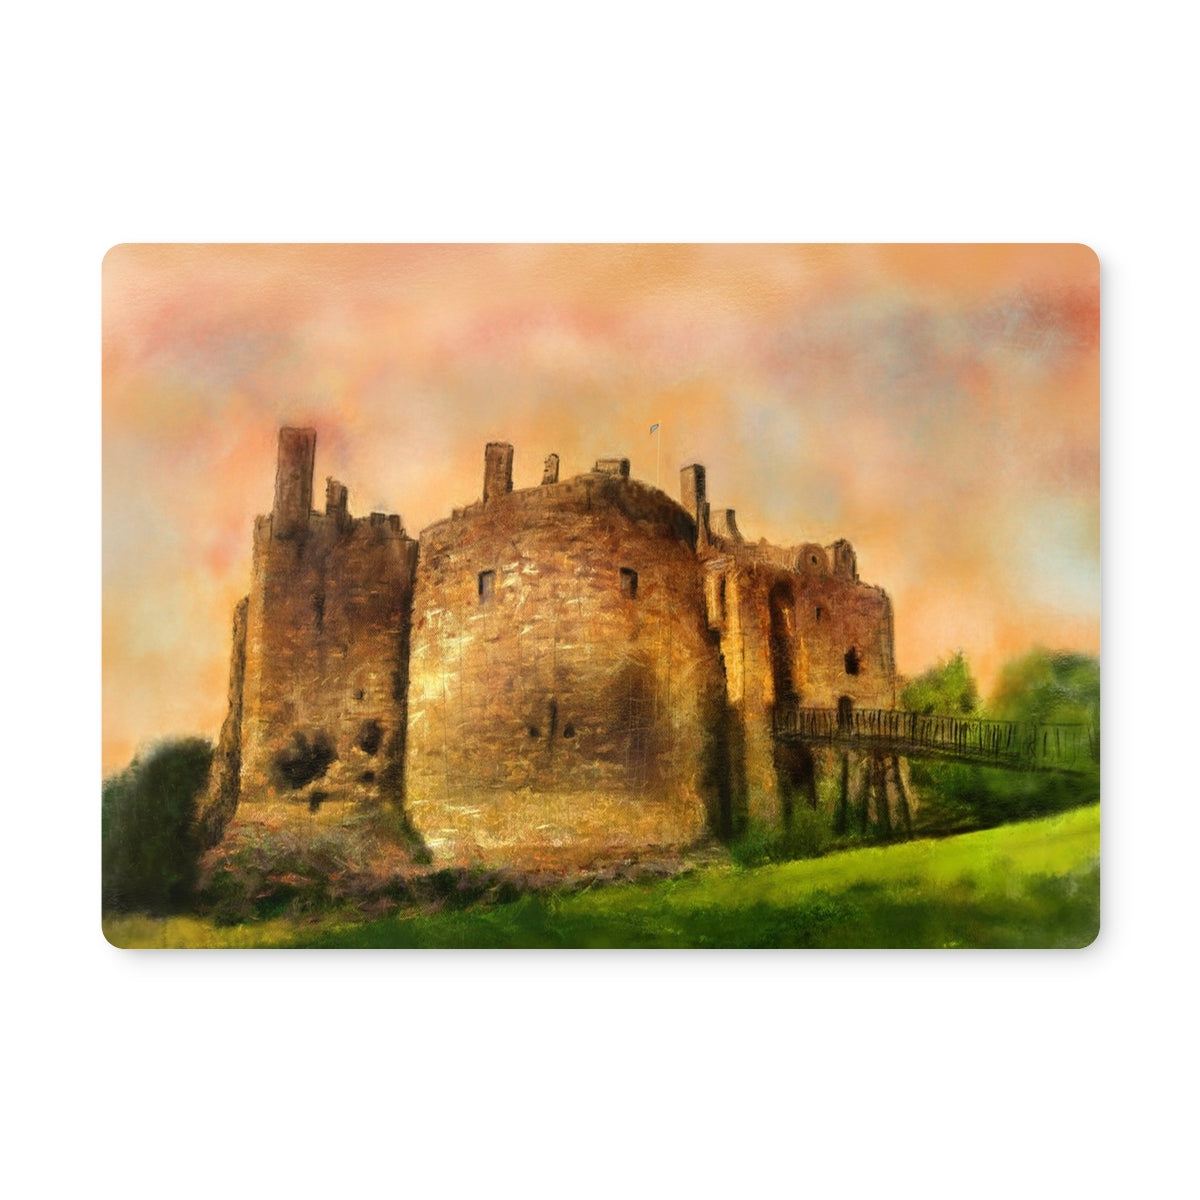 Dirleton Castle Art Gifts Placemat-Placemats-Historic & Iconic Scotland Art Gallery-Single Placemat-Paintings, Prints, Homeware, Art Gifts From Scotland By Scottish Artist Kevin Hunter